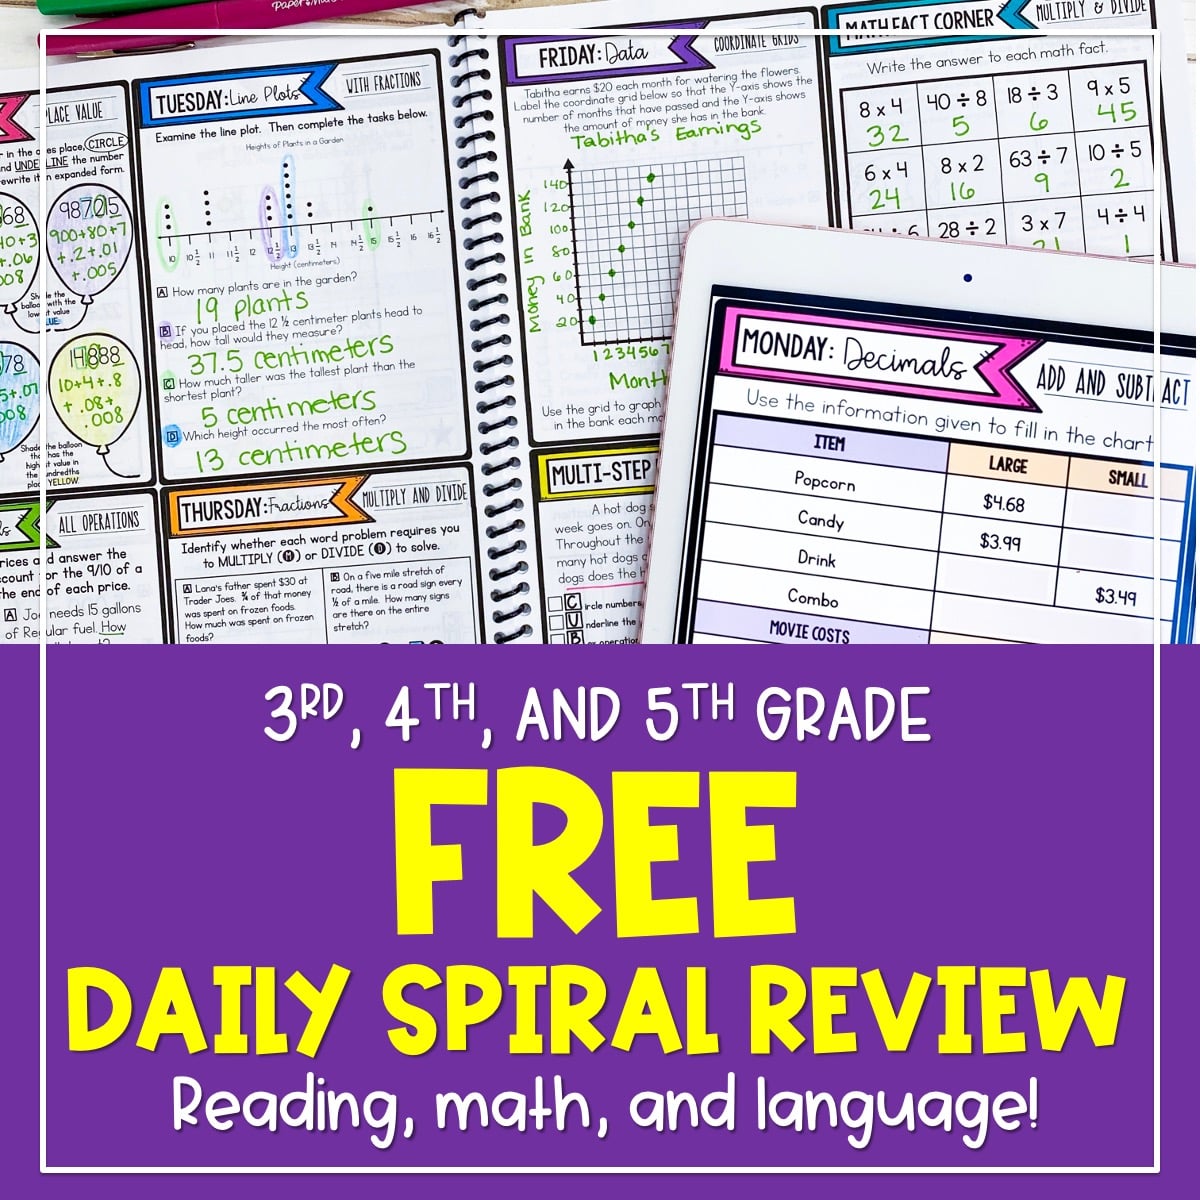 Download free Skill of the Day weeks for spiral review in reading, math, and language from Teaching with a Mountain View.